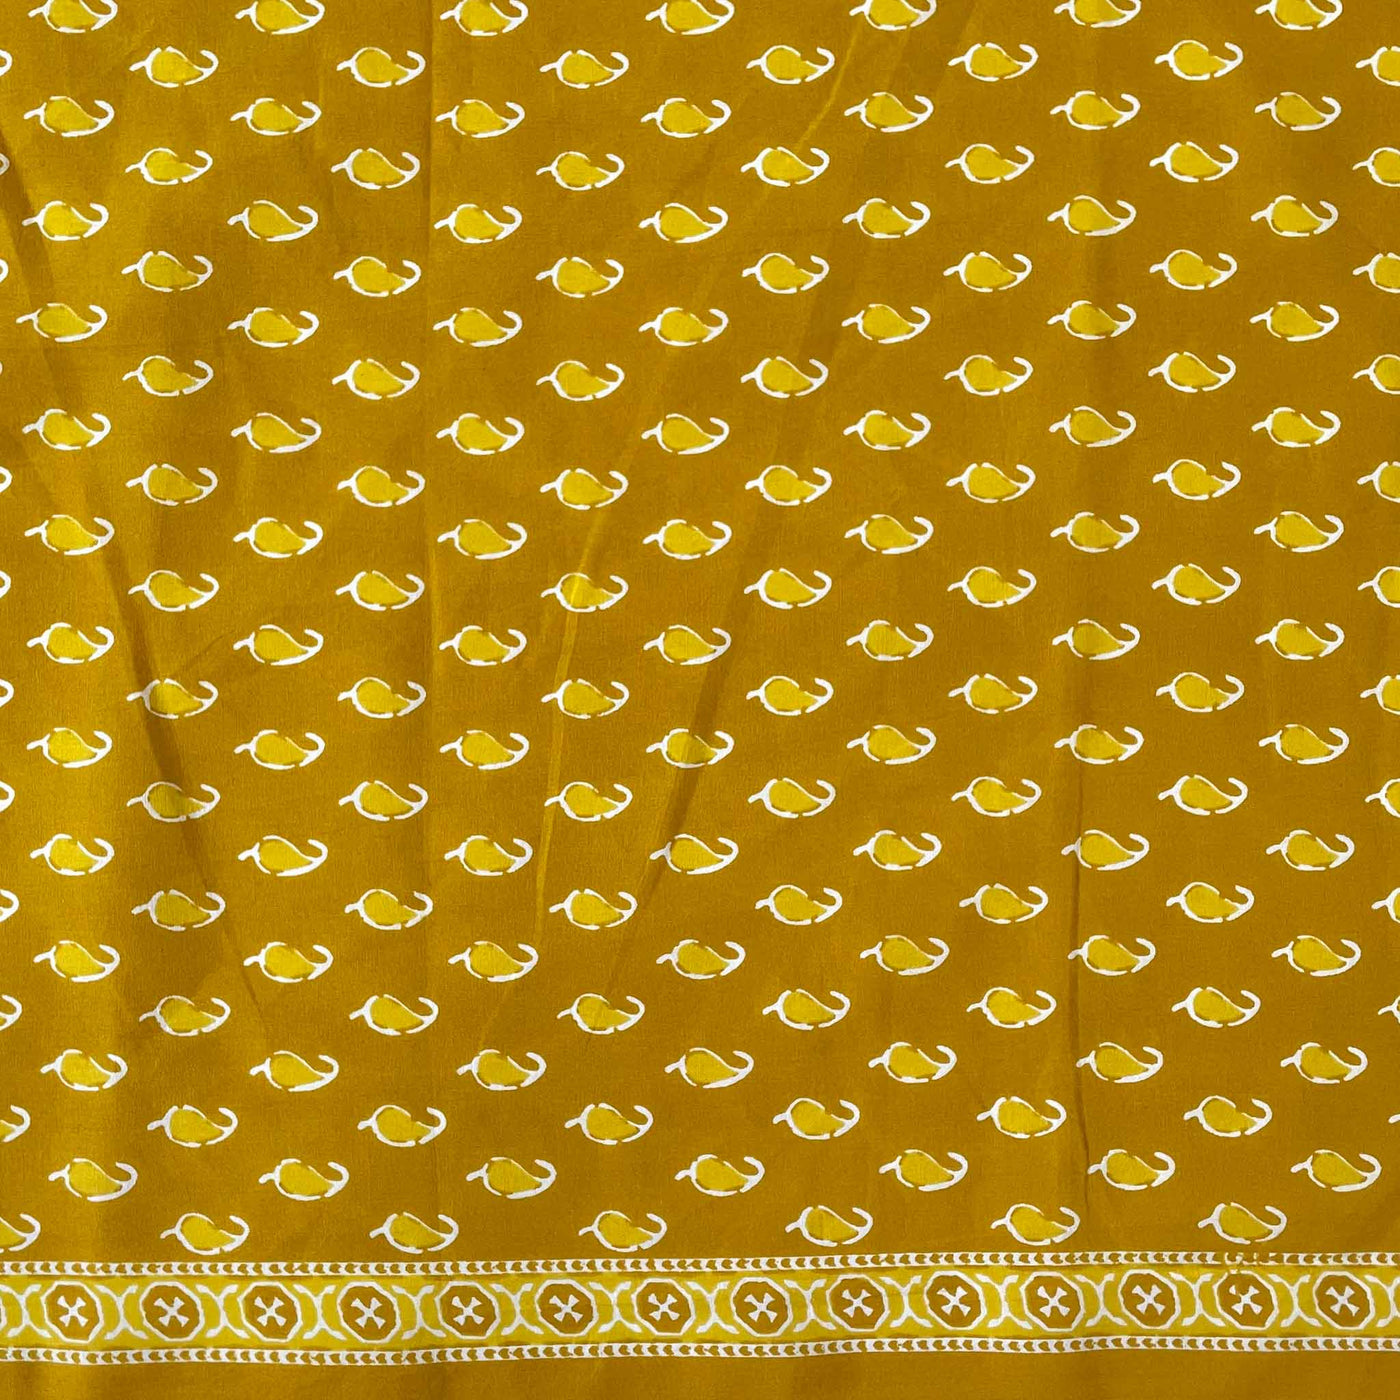 Fabric Pandit Fabric Dusty Mustard Floral Paisely Hand Block Printed Pure Cotton Fabirc Width (43 inches)